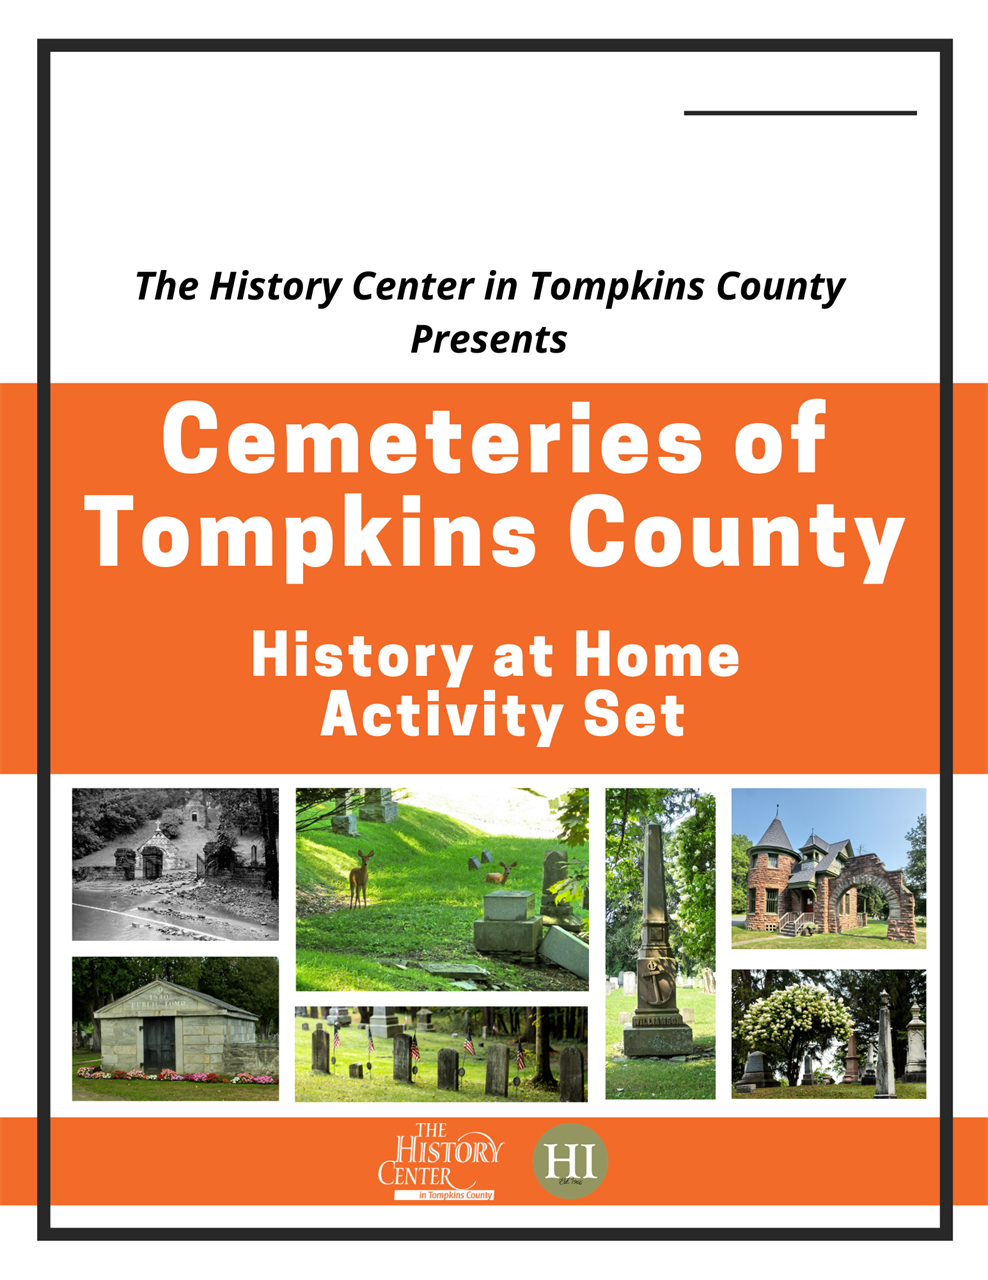 A link/image to a downloadable activity called "Cemeteries of Tompkins County History at Home Activity Set"